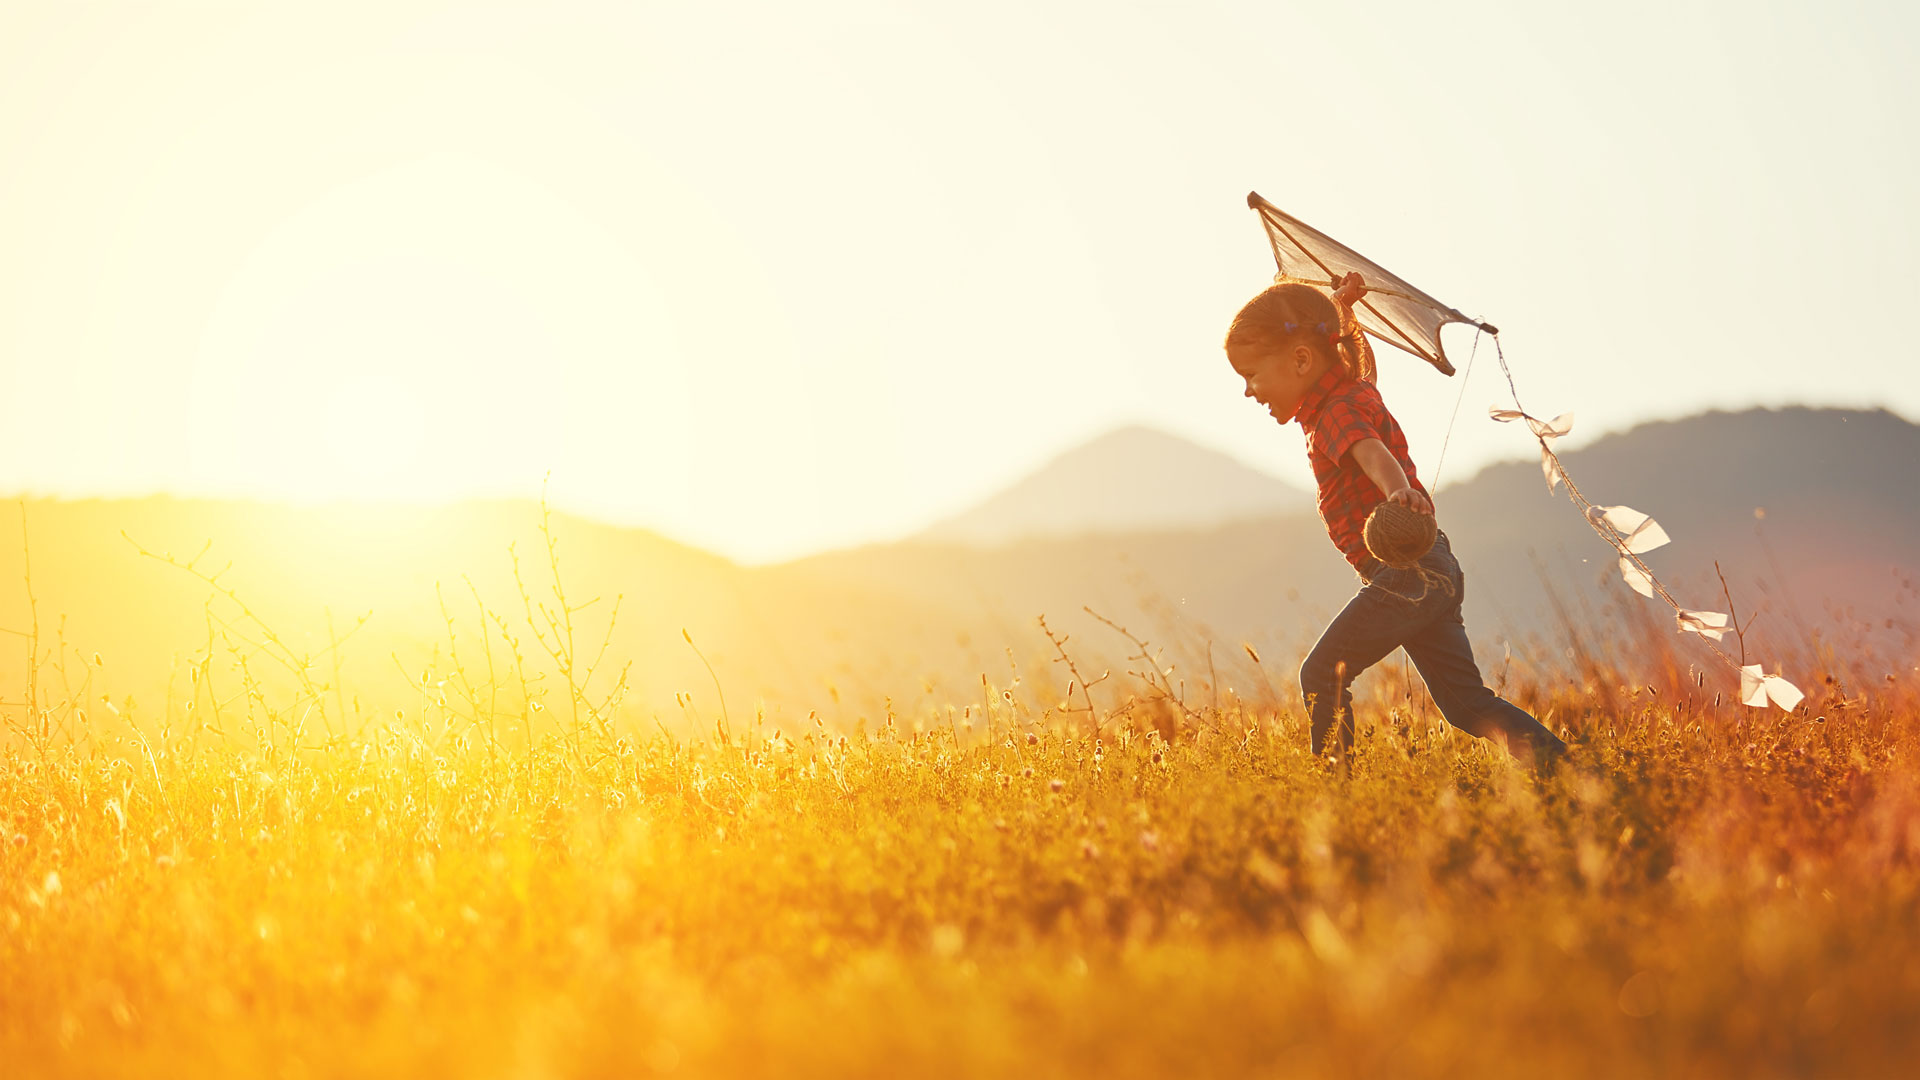 A child runs through a sunlit field with a kite trailing behind. The distant mountains and warm, golden glow of the setting sun create a serene, joyful scene. The carefree spirit of the moment contrasts sharply with memories often addressed in trauma clinics.